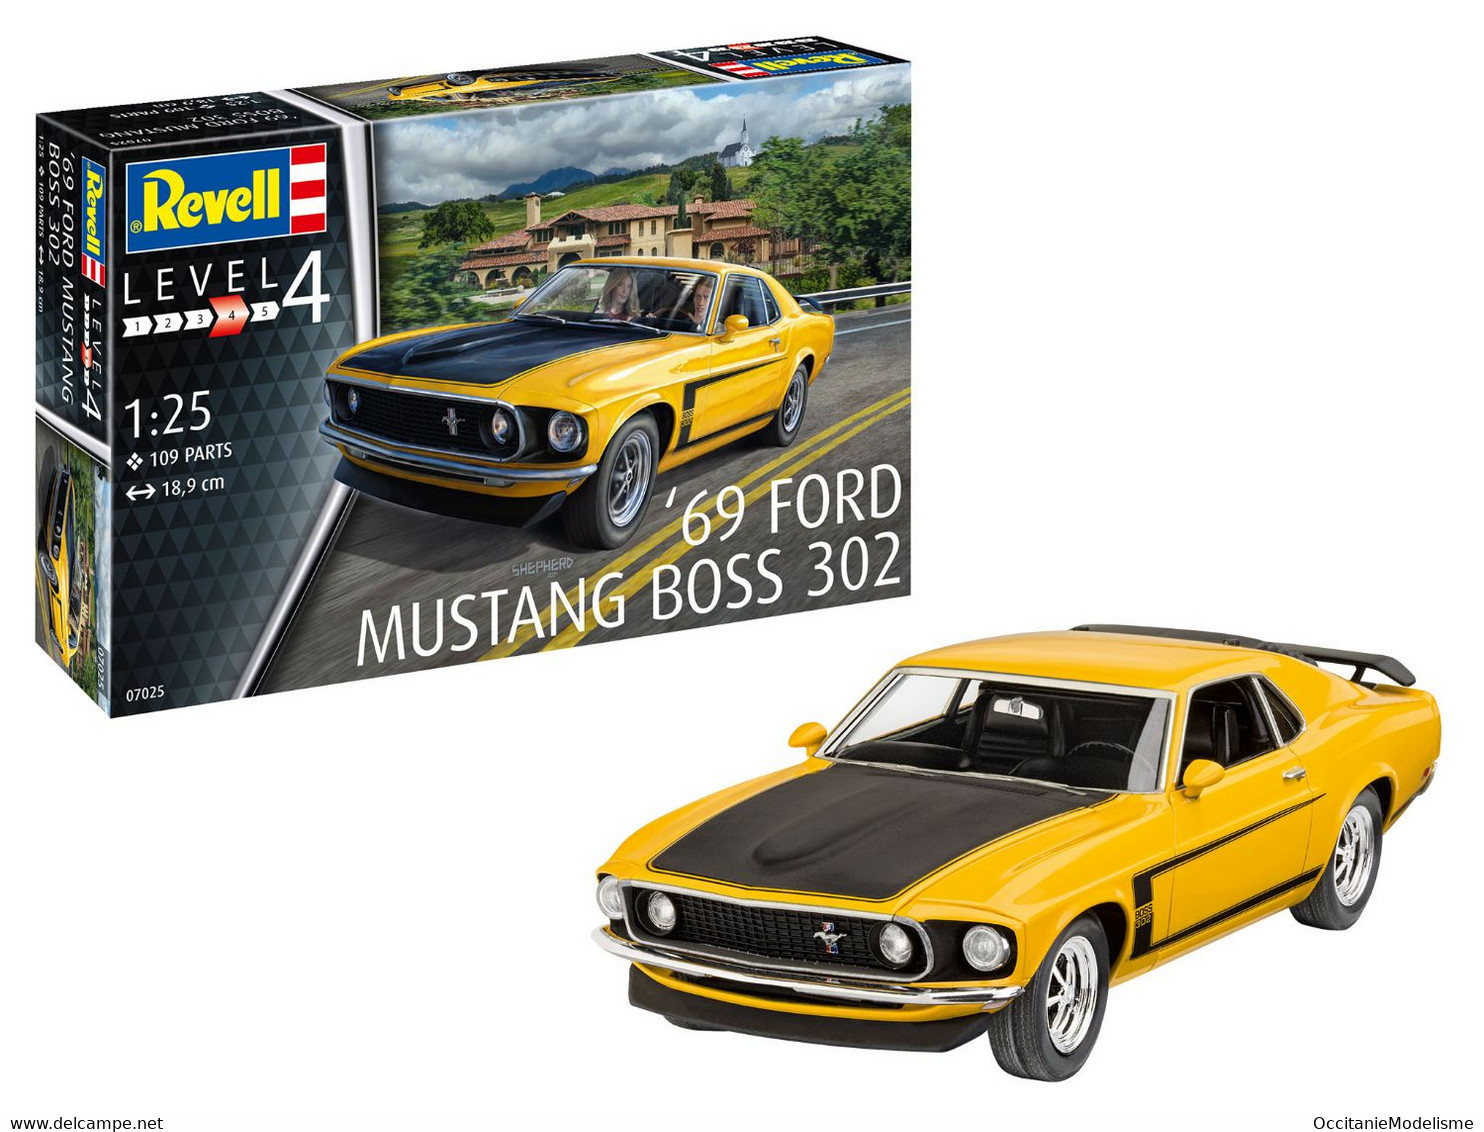 Revell - FORD MUSTANG BOSS 302 1969 Maquette Kit Plastique Réf. 07025 Neuf 1/25 - Voitures